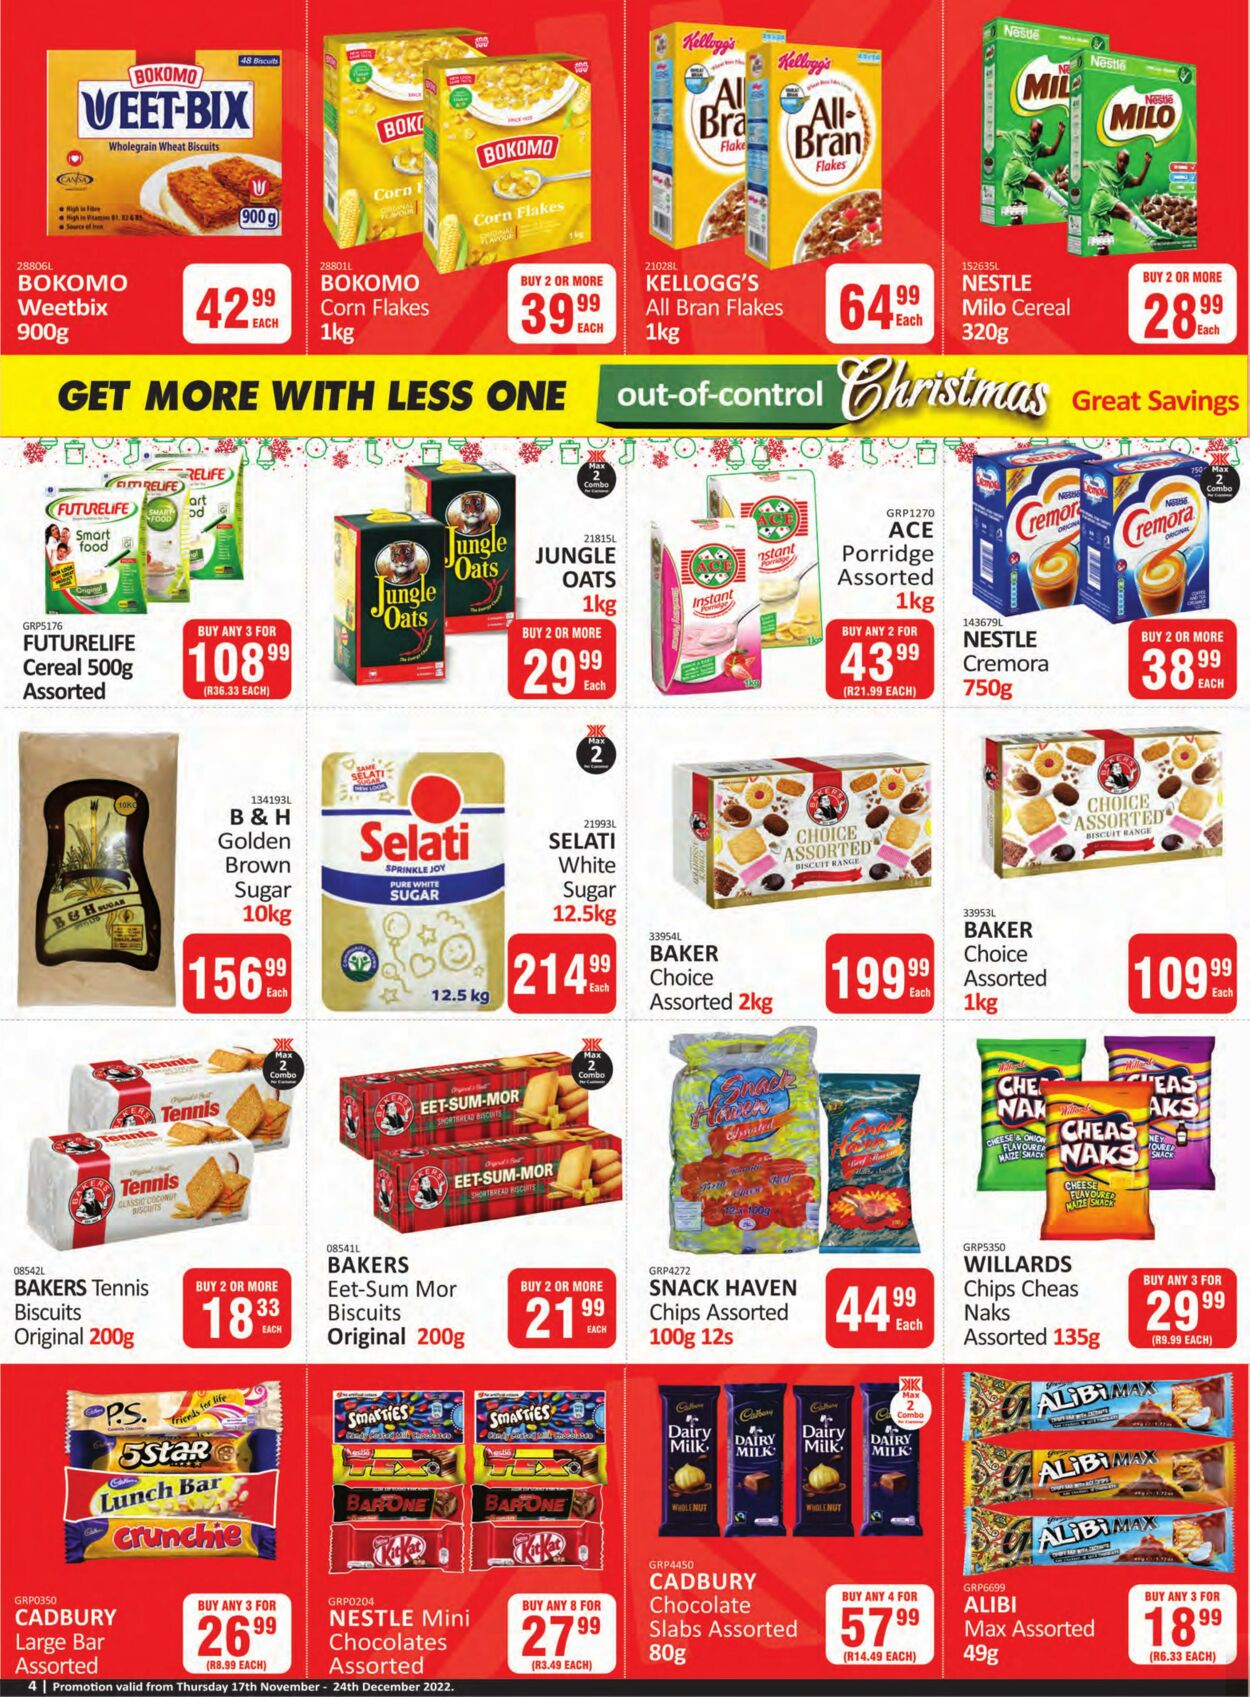 Special Kit Kat Cash and Carry 17.11.2022 - 24.12.2022